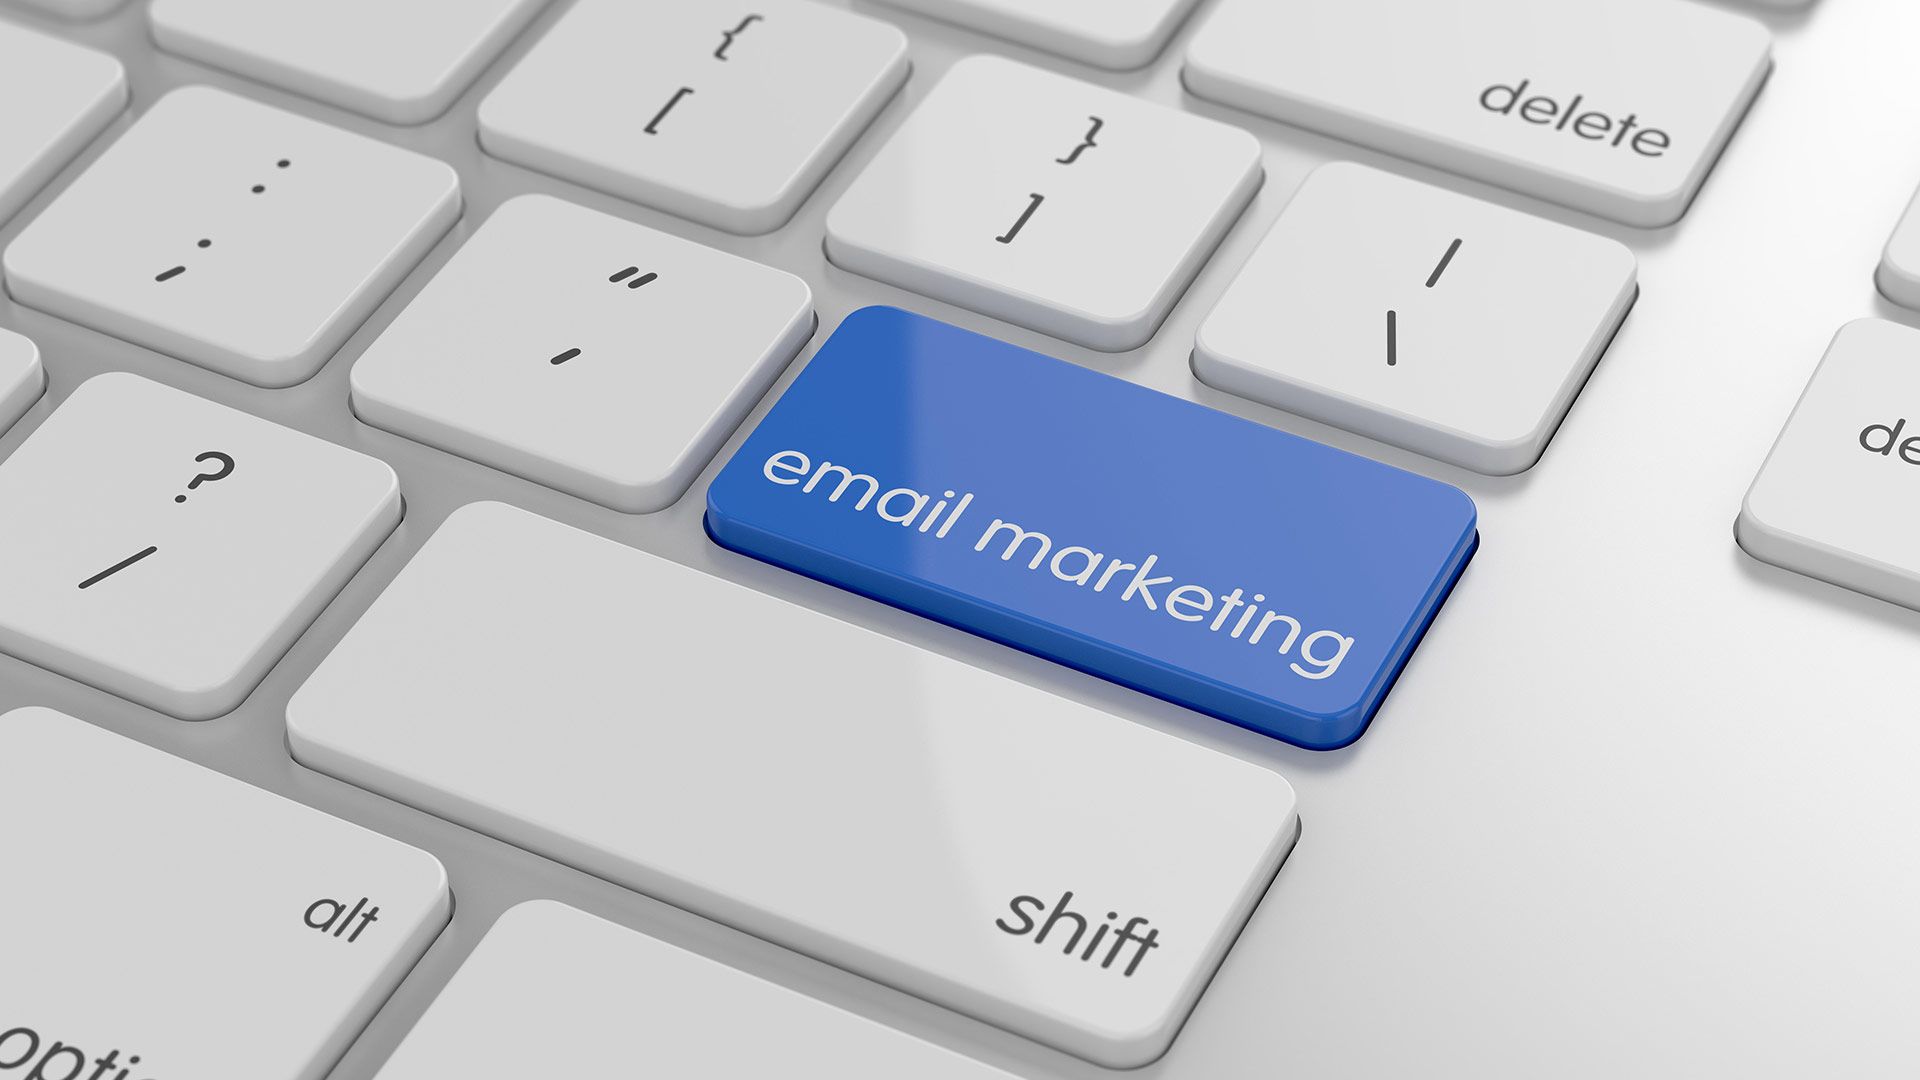 Email Campaign Builder: Powering Your Marketing Efforts, Top Tips 4 U